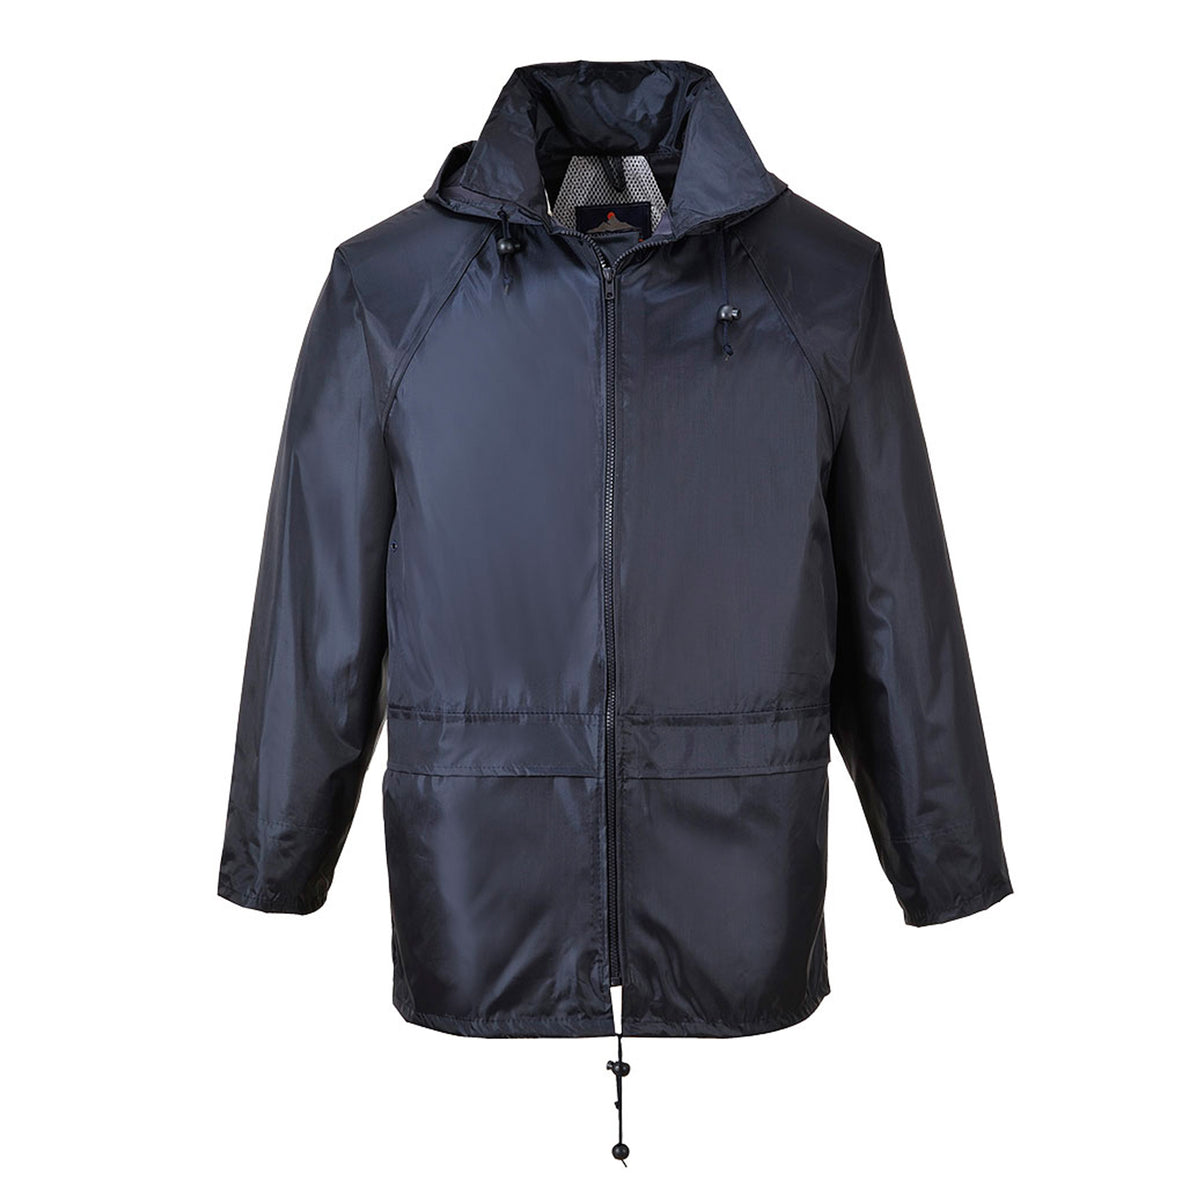 prime mover classic rain jacket in navy